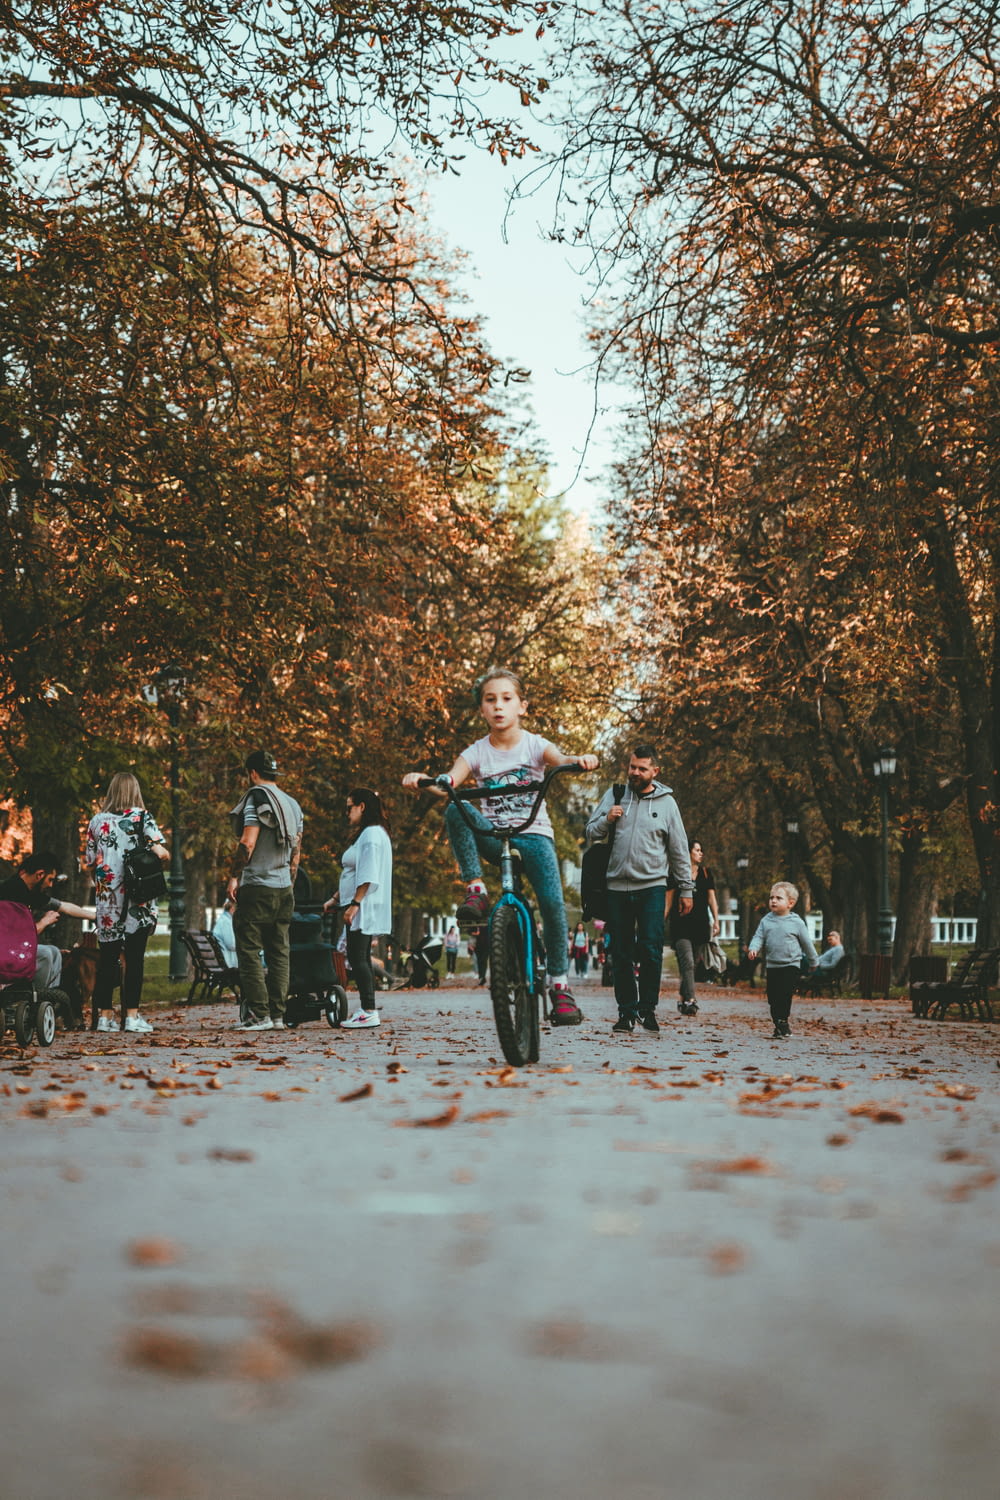 girl riding bicycle on pathway surrounded by people